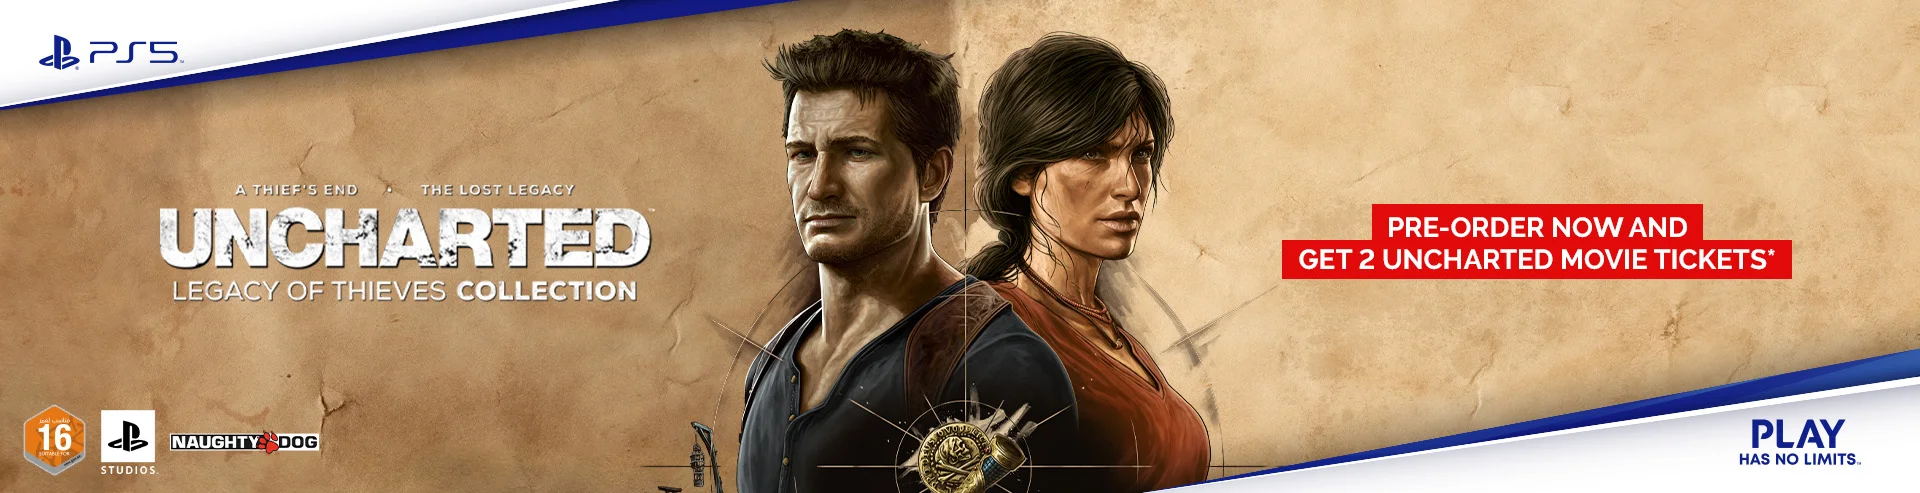 Full-Width-Large-Uncharted-Legacy-of-Thieves-Collection-Desktop.webp